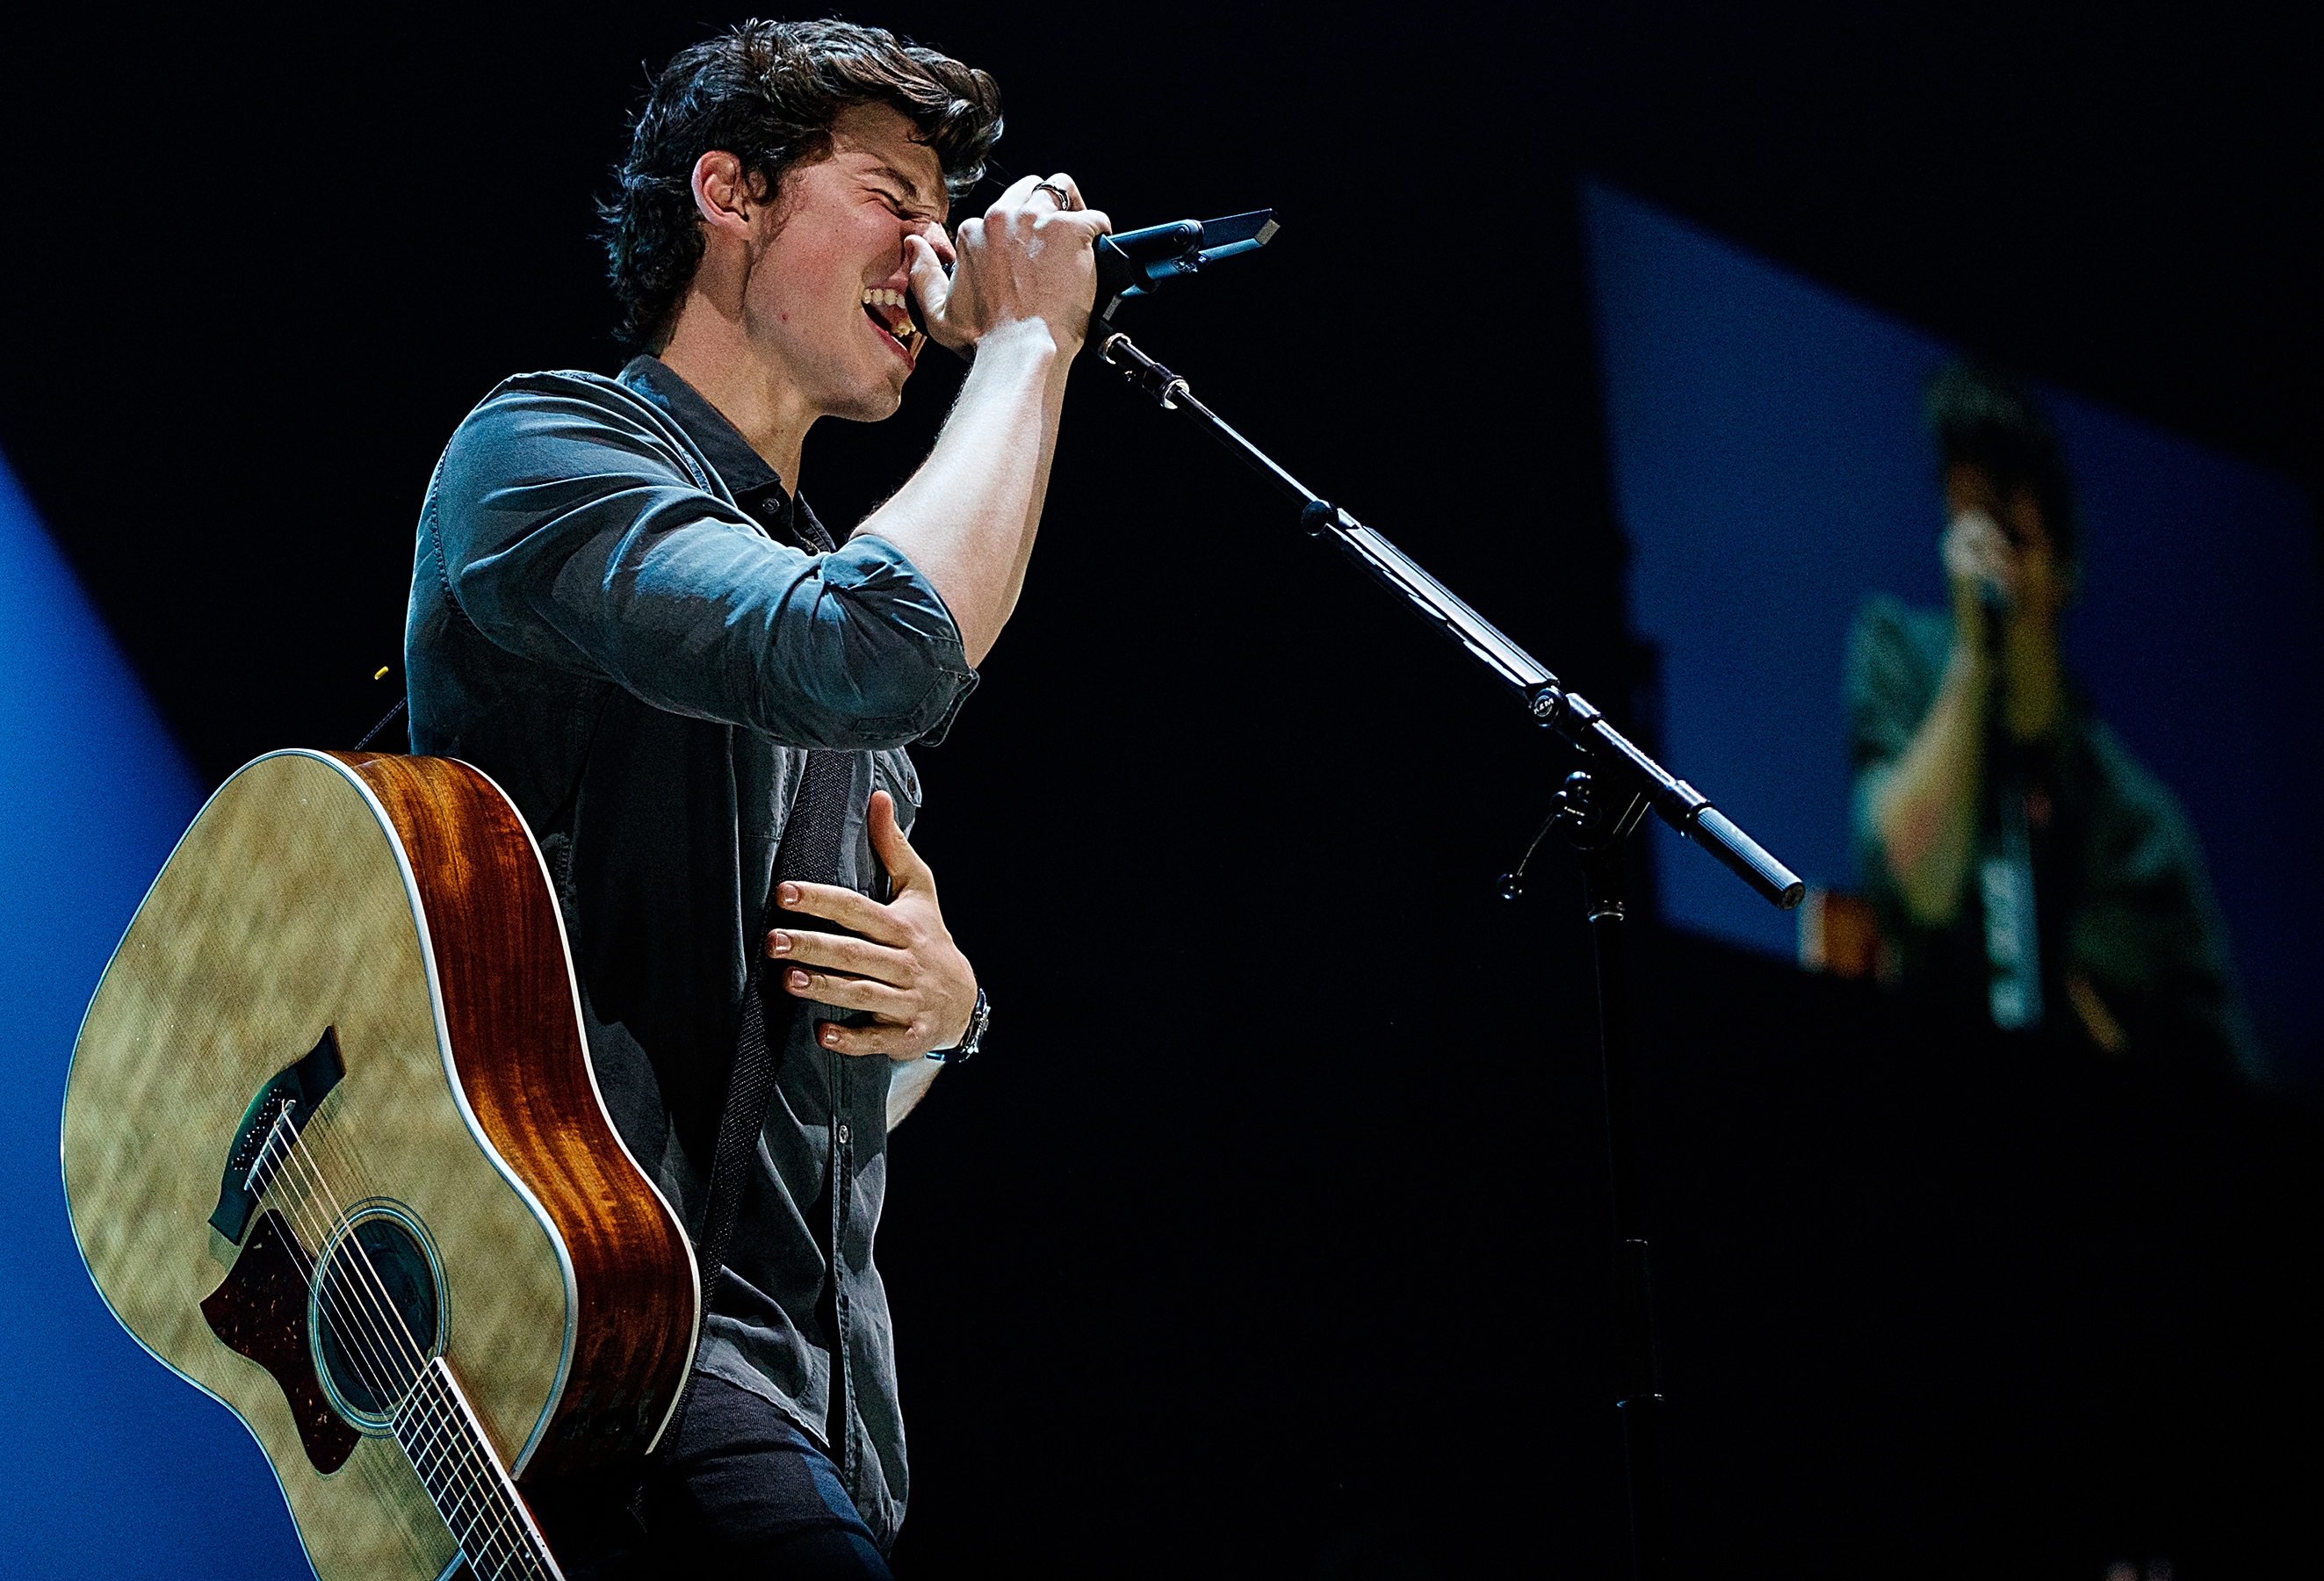 Shawn Mendes: Mercy, Treat You Better and More Song Meanings